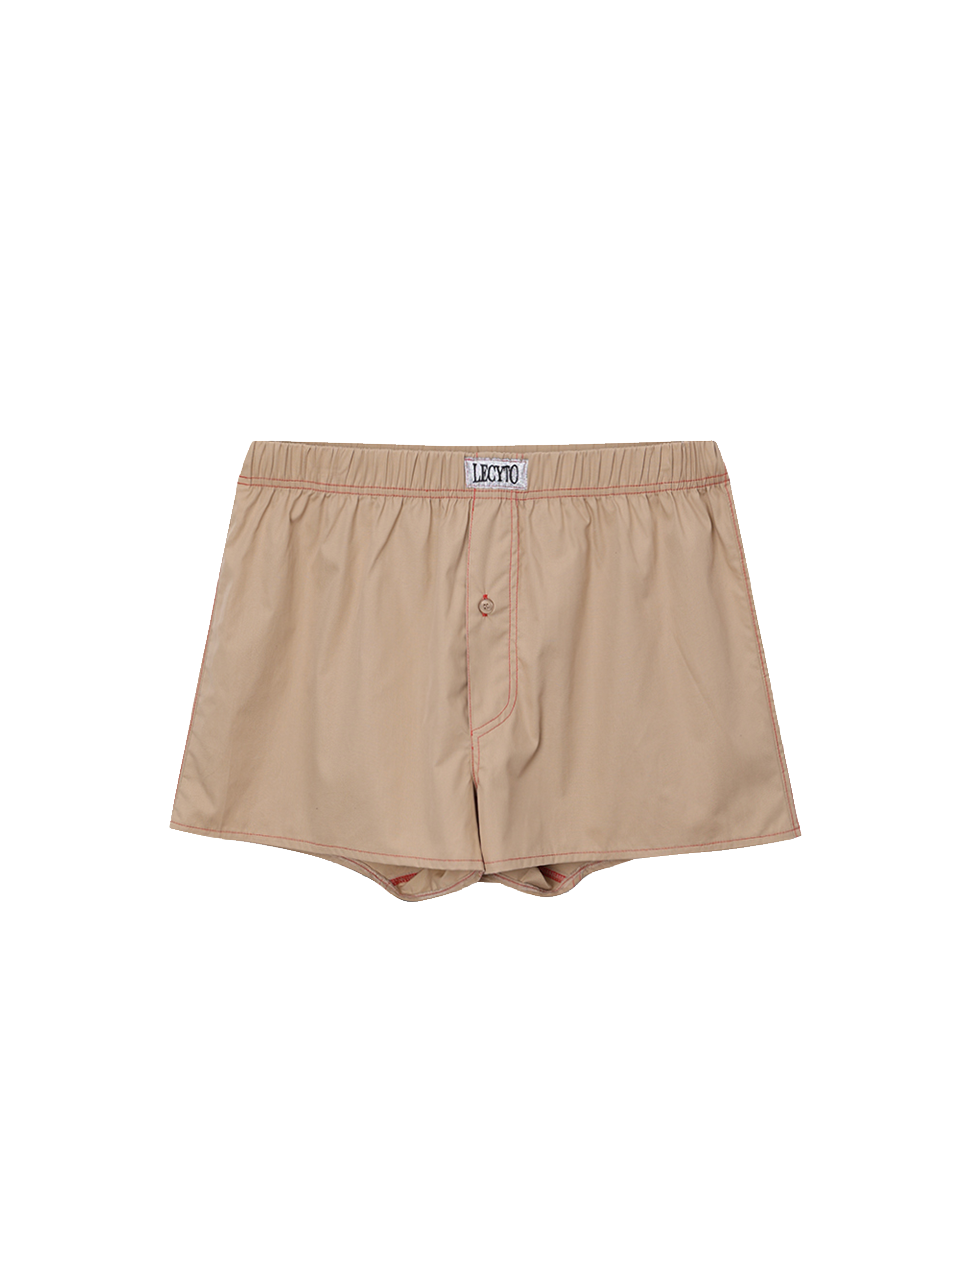 Layered Trunk Pants - Beige